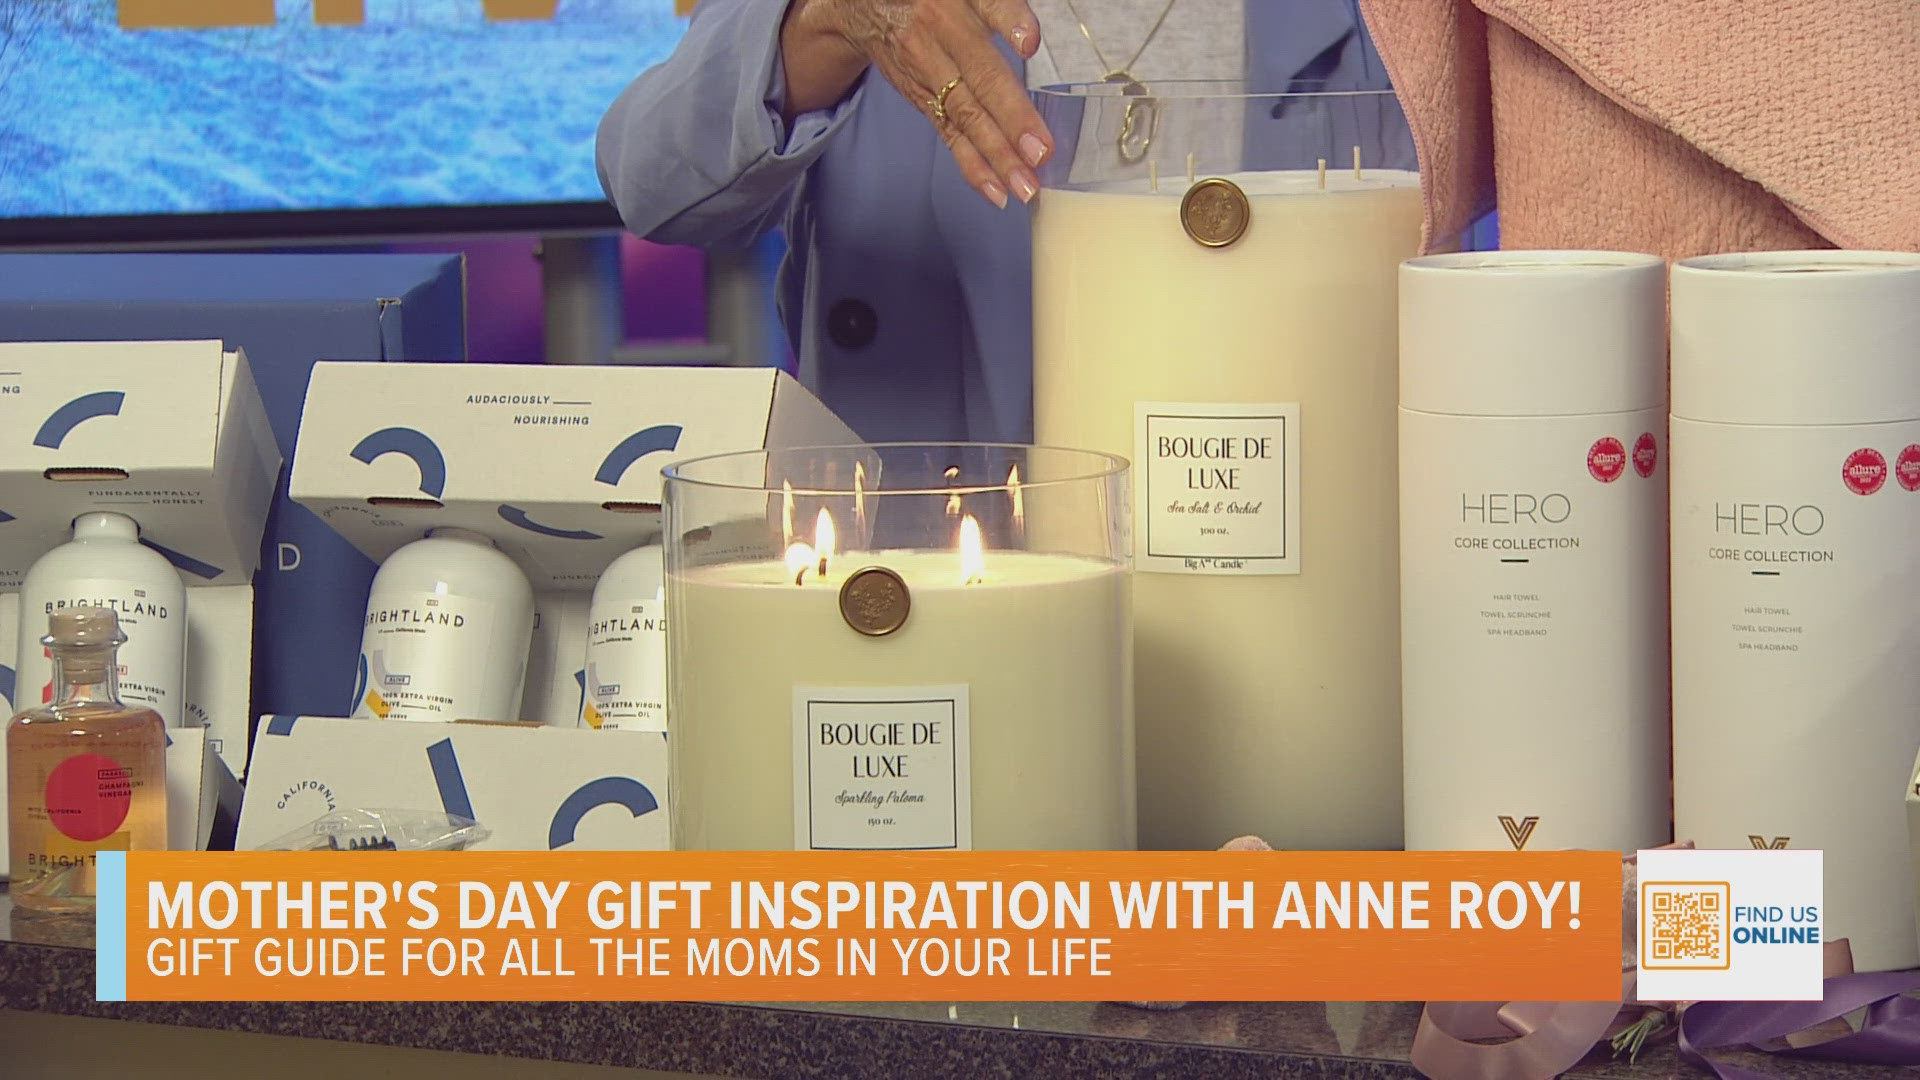 Gift guide for all the moms in your life